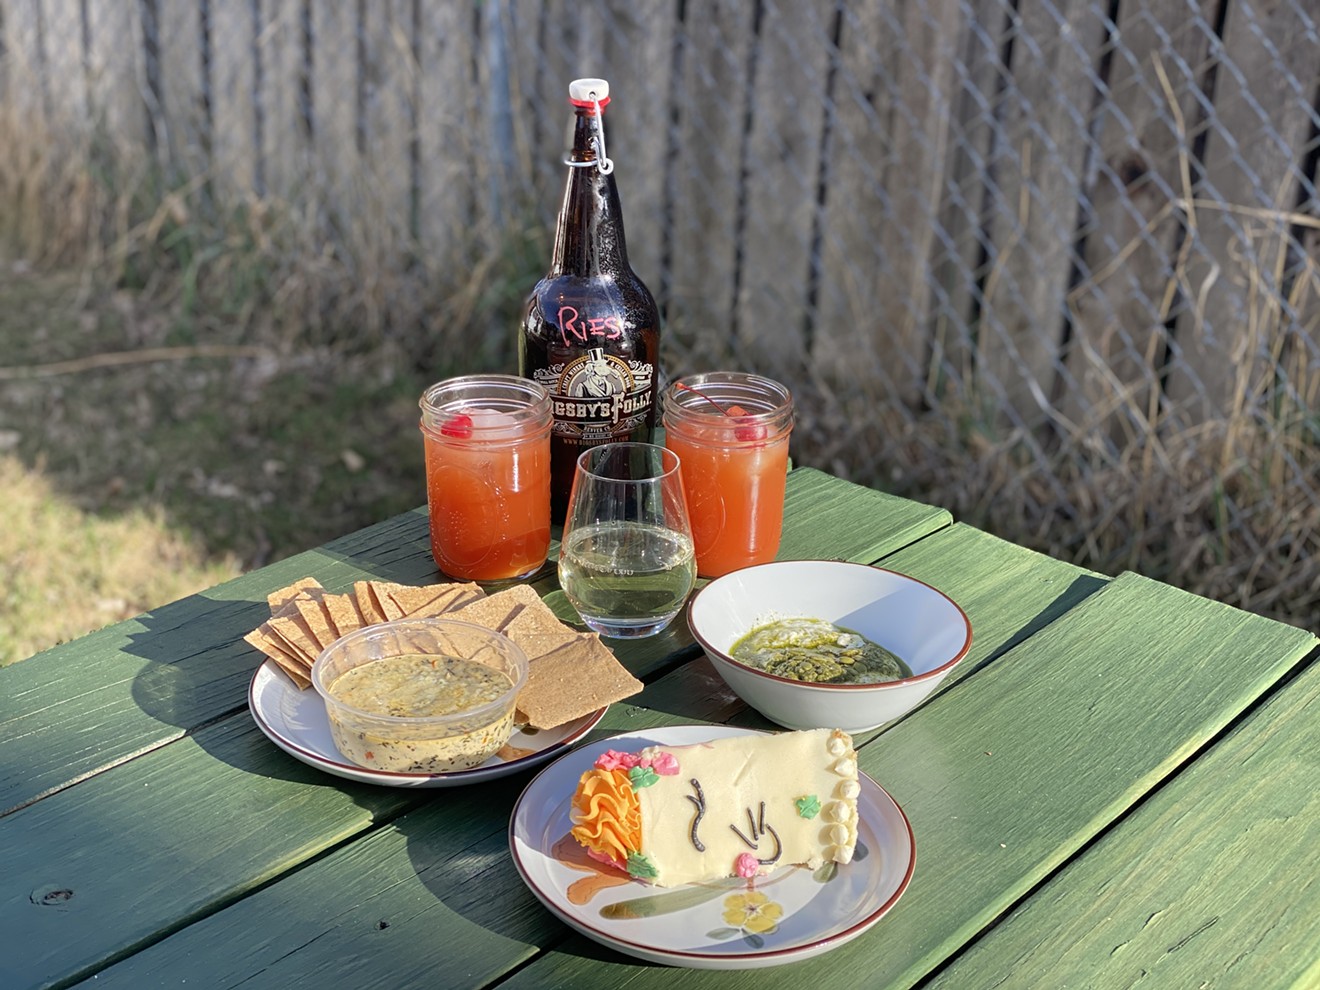 A growler of wine, cocktails, snacks and dessert from Bigsby's folly to enjoy at home.